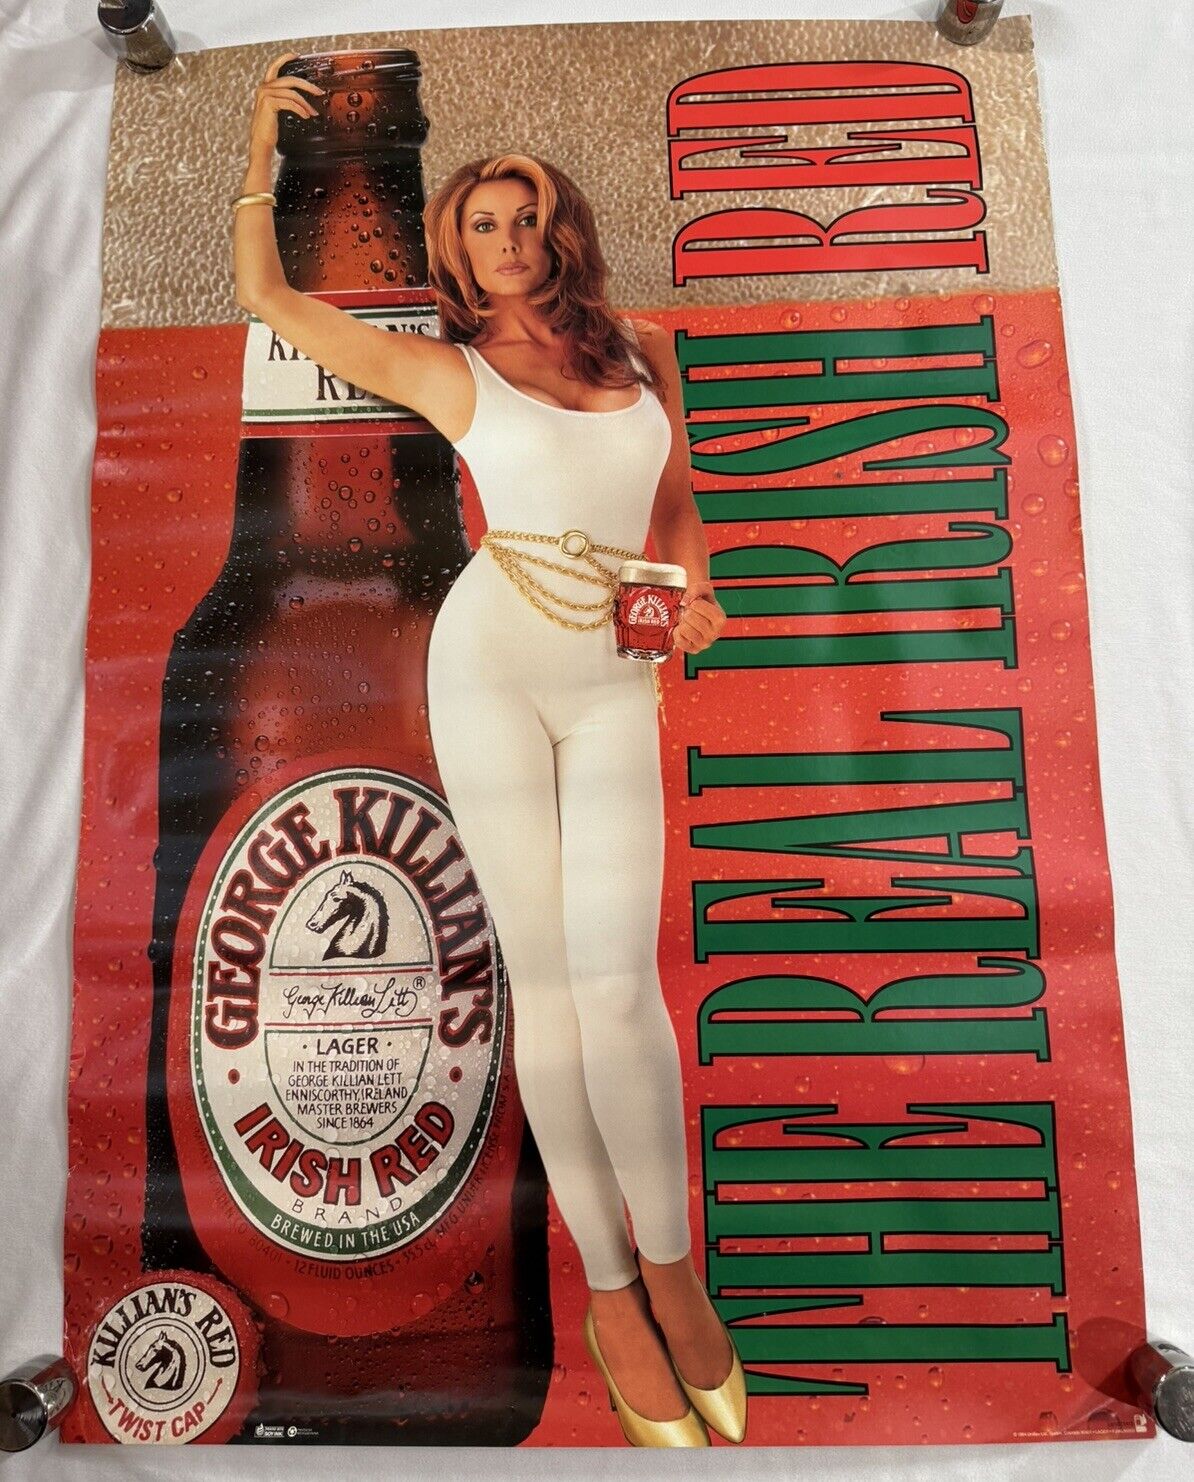 George Killian\'s Lager - The Real Irish Red Beer Poster 21x30” Pinup 1994 Garage